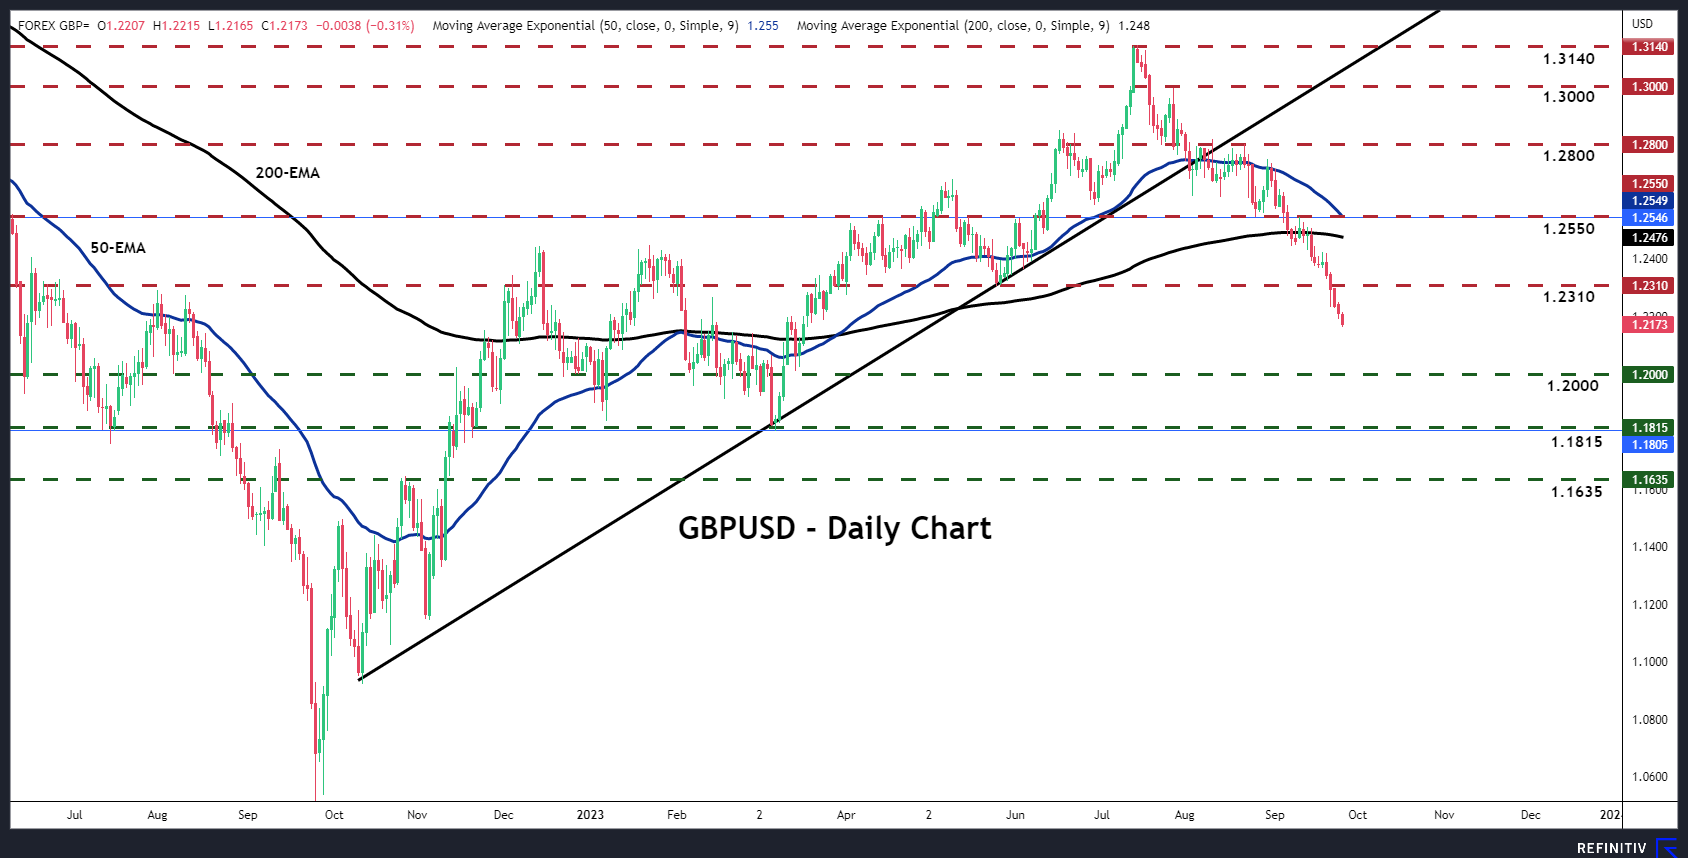 In the forex market, pound/dollar (GBPUSD) stands out as a pair that could continue to face pressure